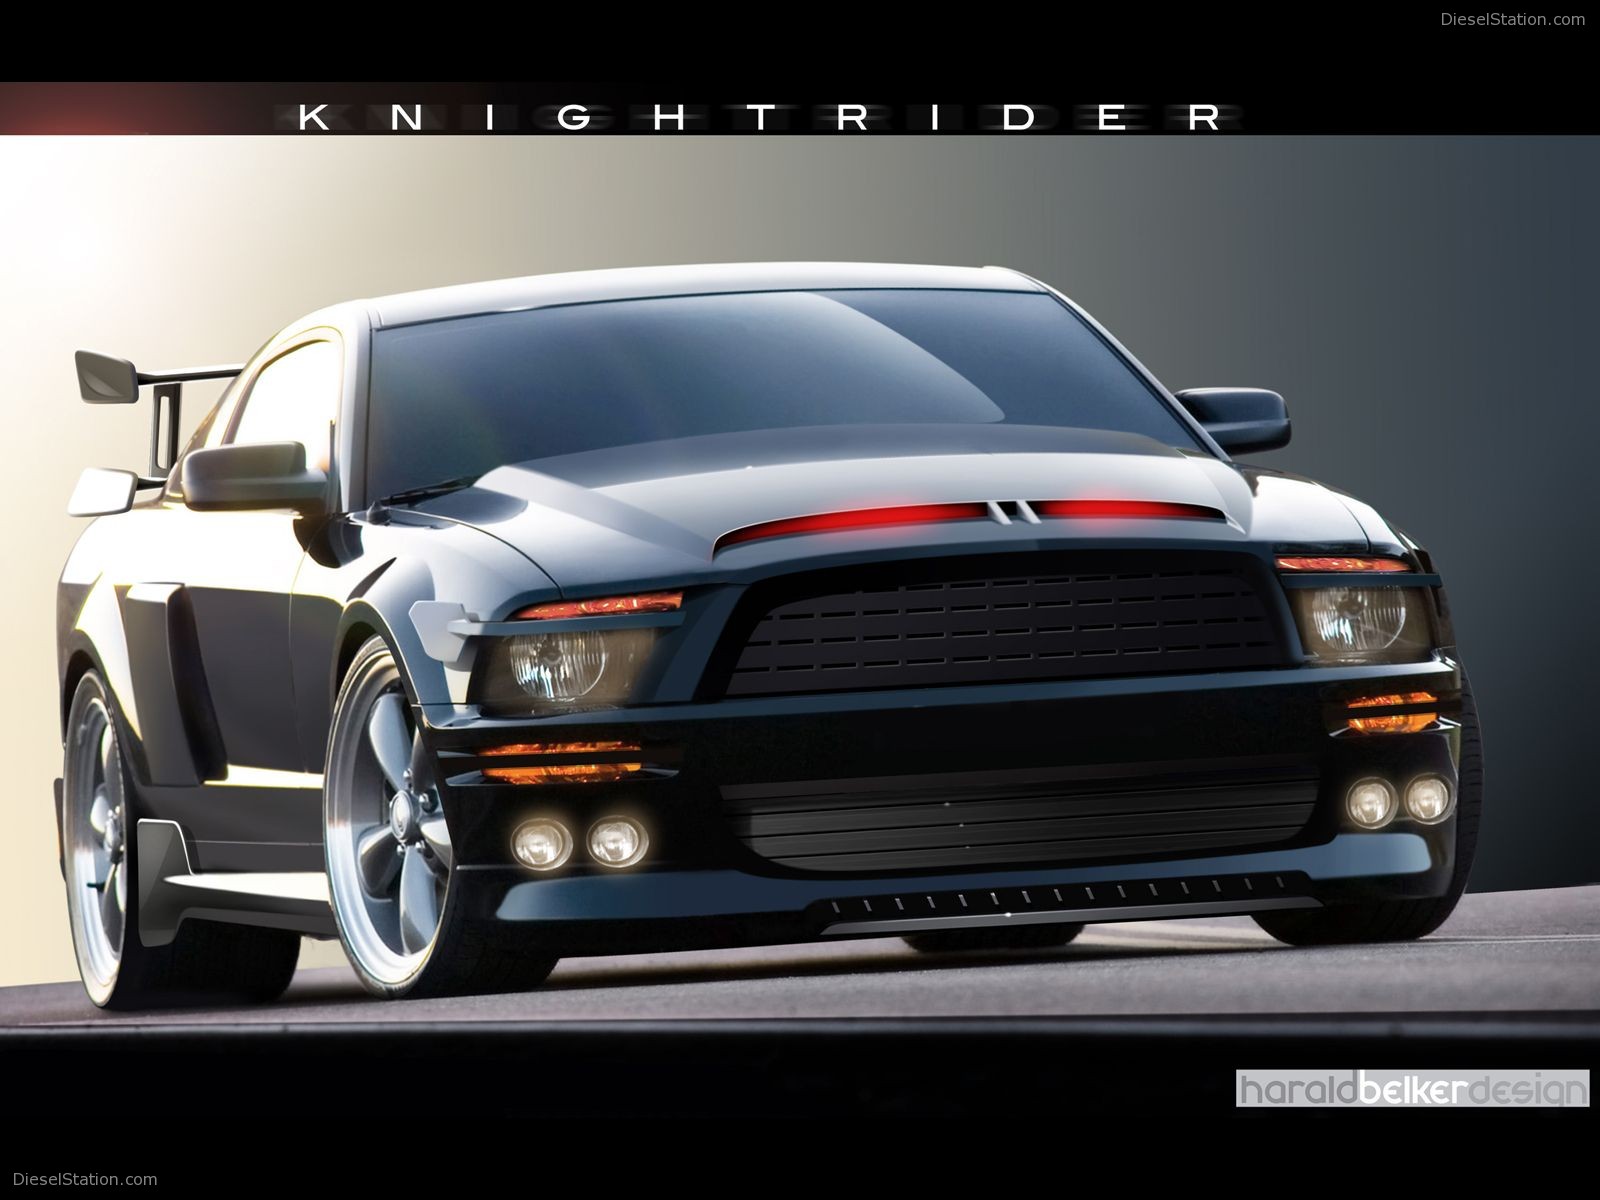 Home Shelby Knight Rider Shelby Mustang GT500KR 1600x1200